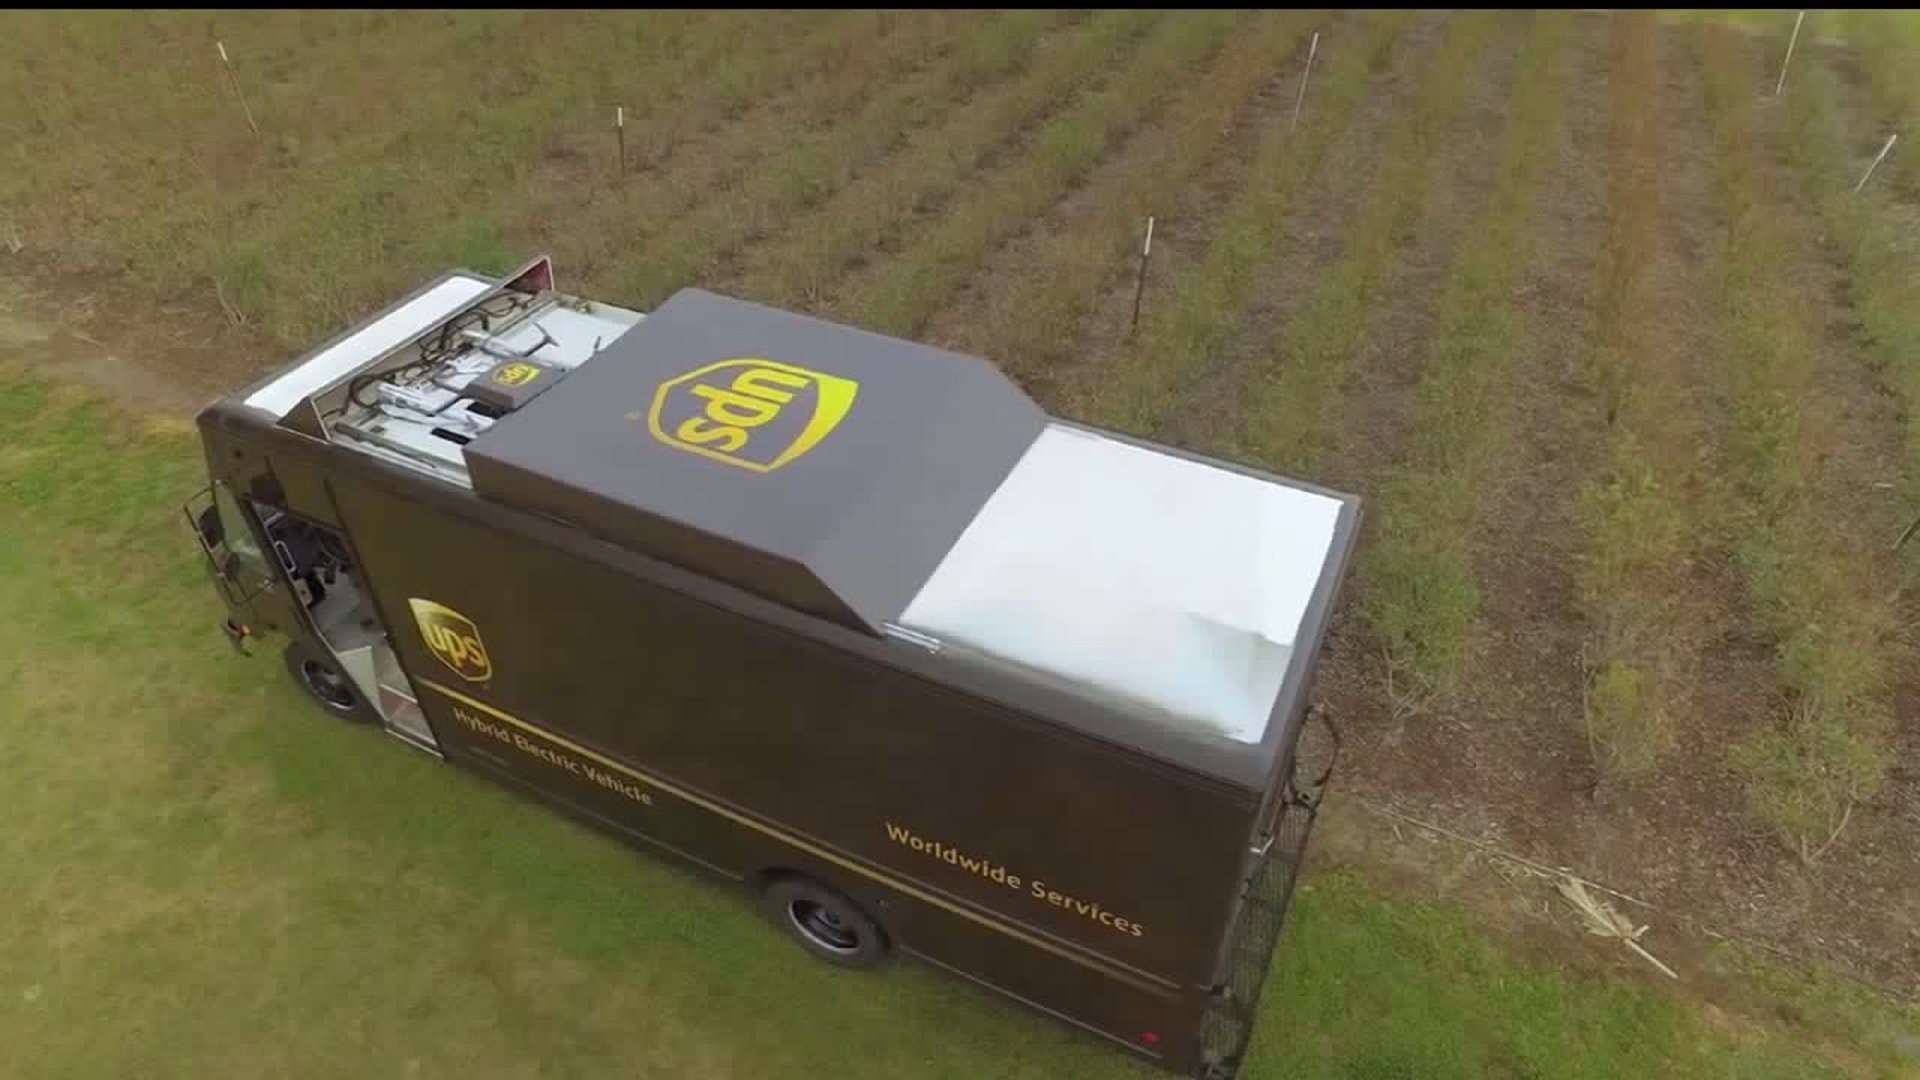 UPS Can Now Use Drones